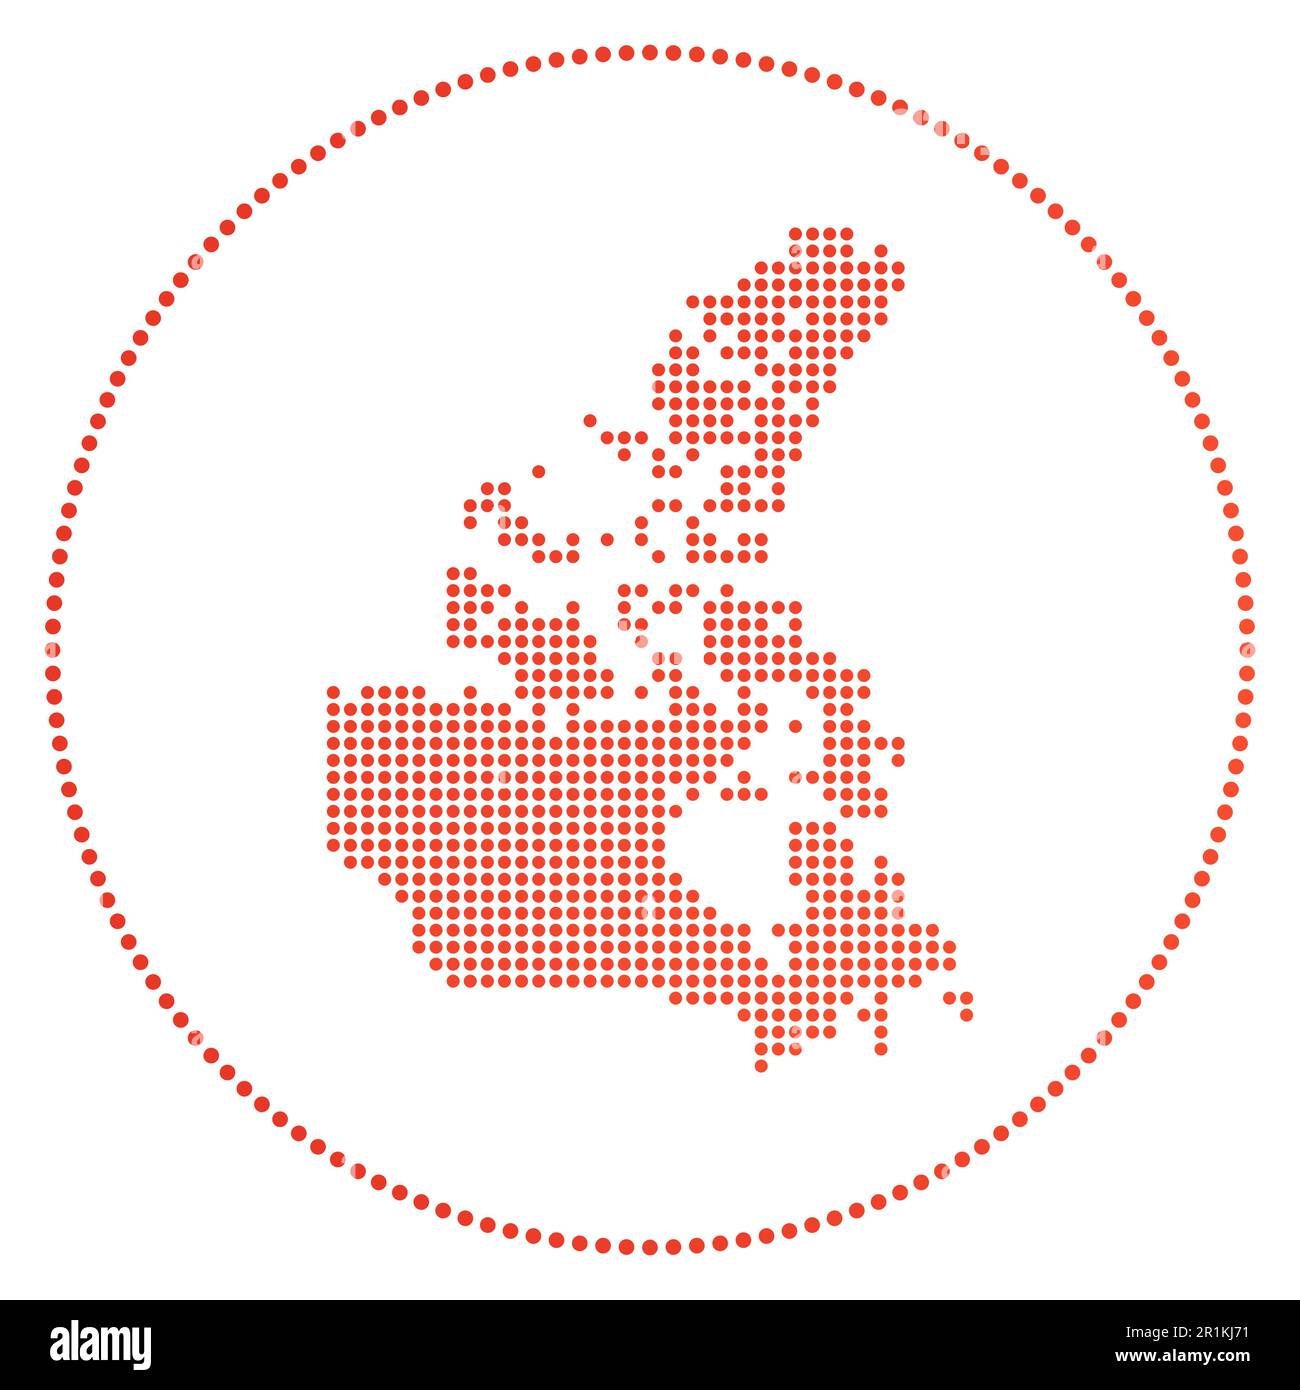 Canada digital badge. Dotted style map of Canada in circle. Tech icon of the country with gradiented dots. Cool vector illustration. Stock Vector